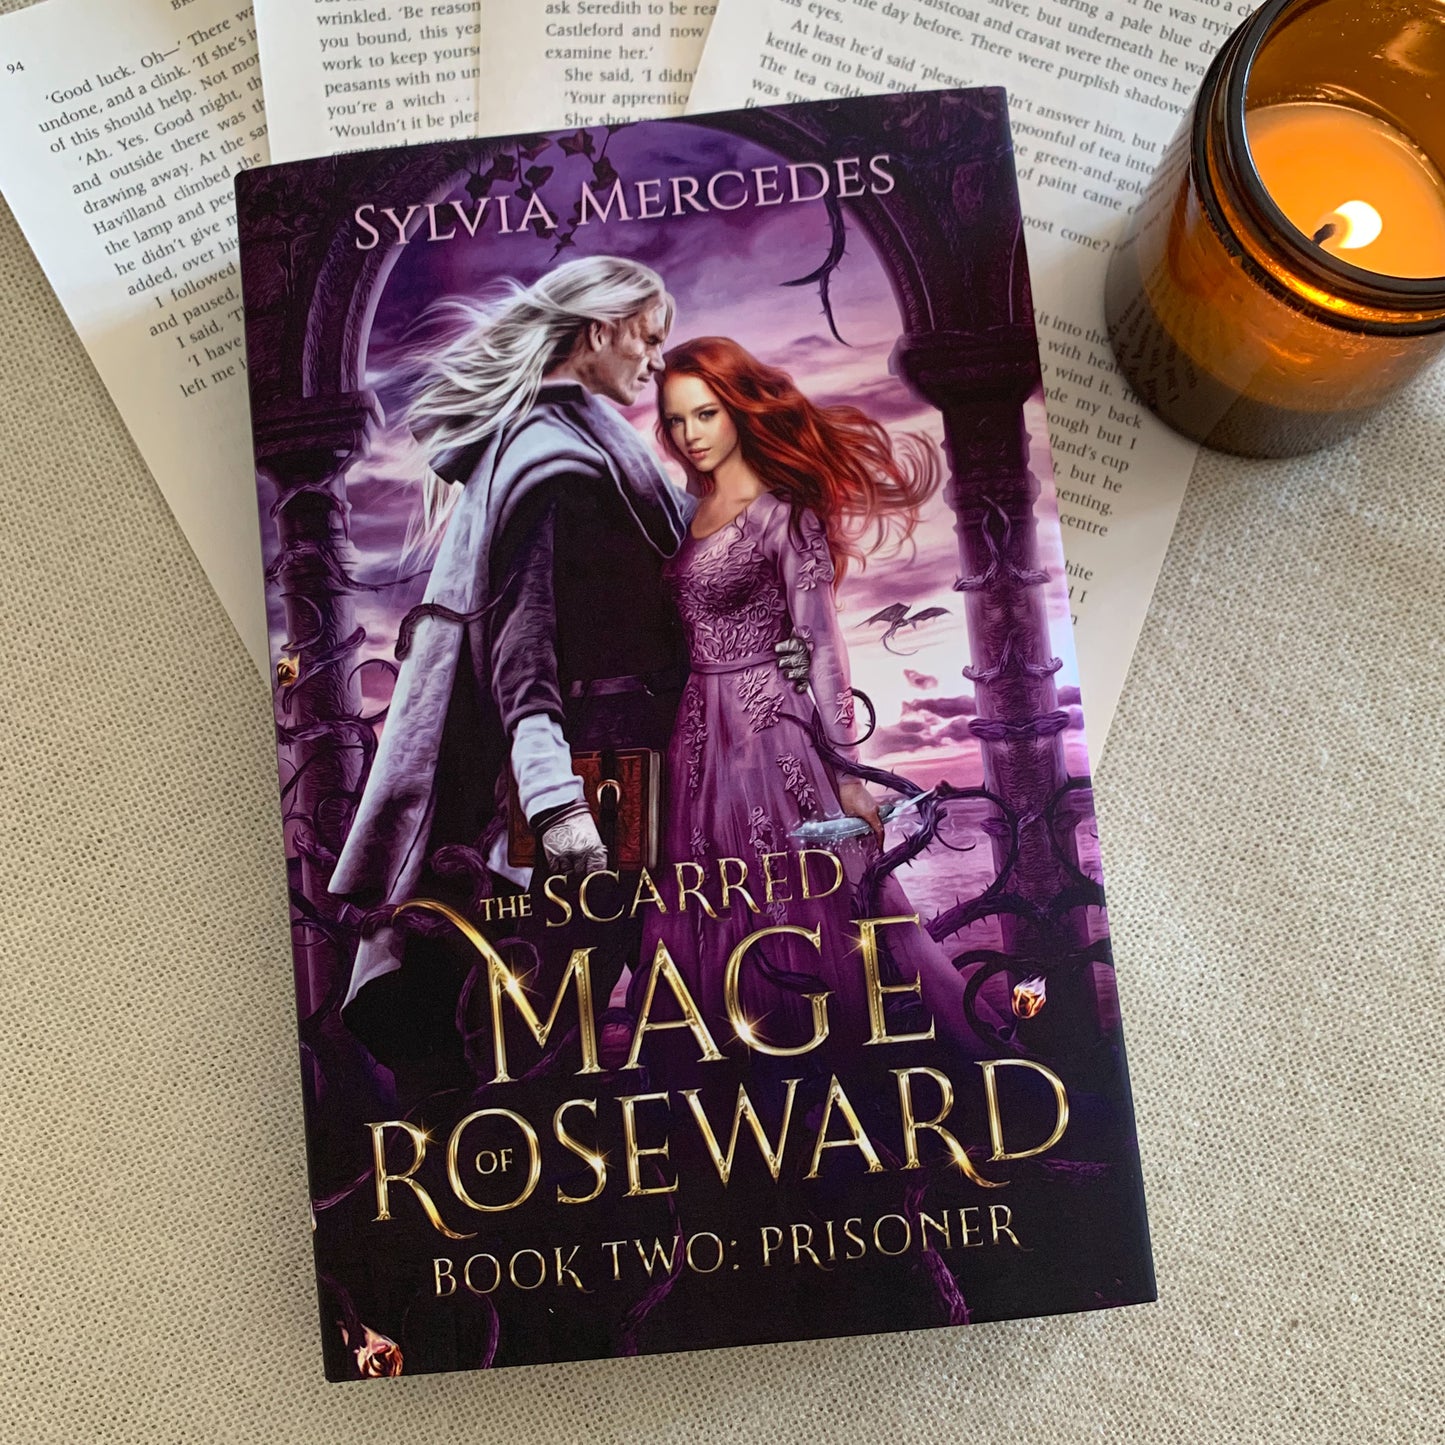 The Scarred Mage of Roseward - Hardcovers by Sylvia Mercedes